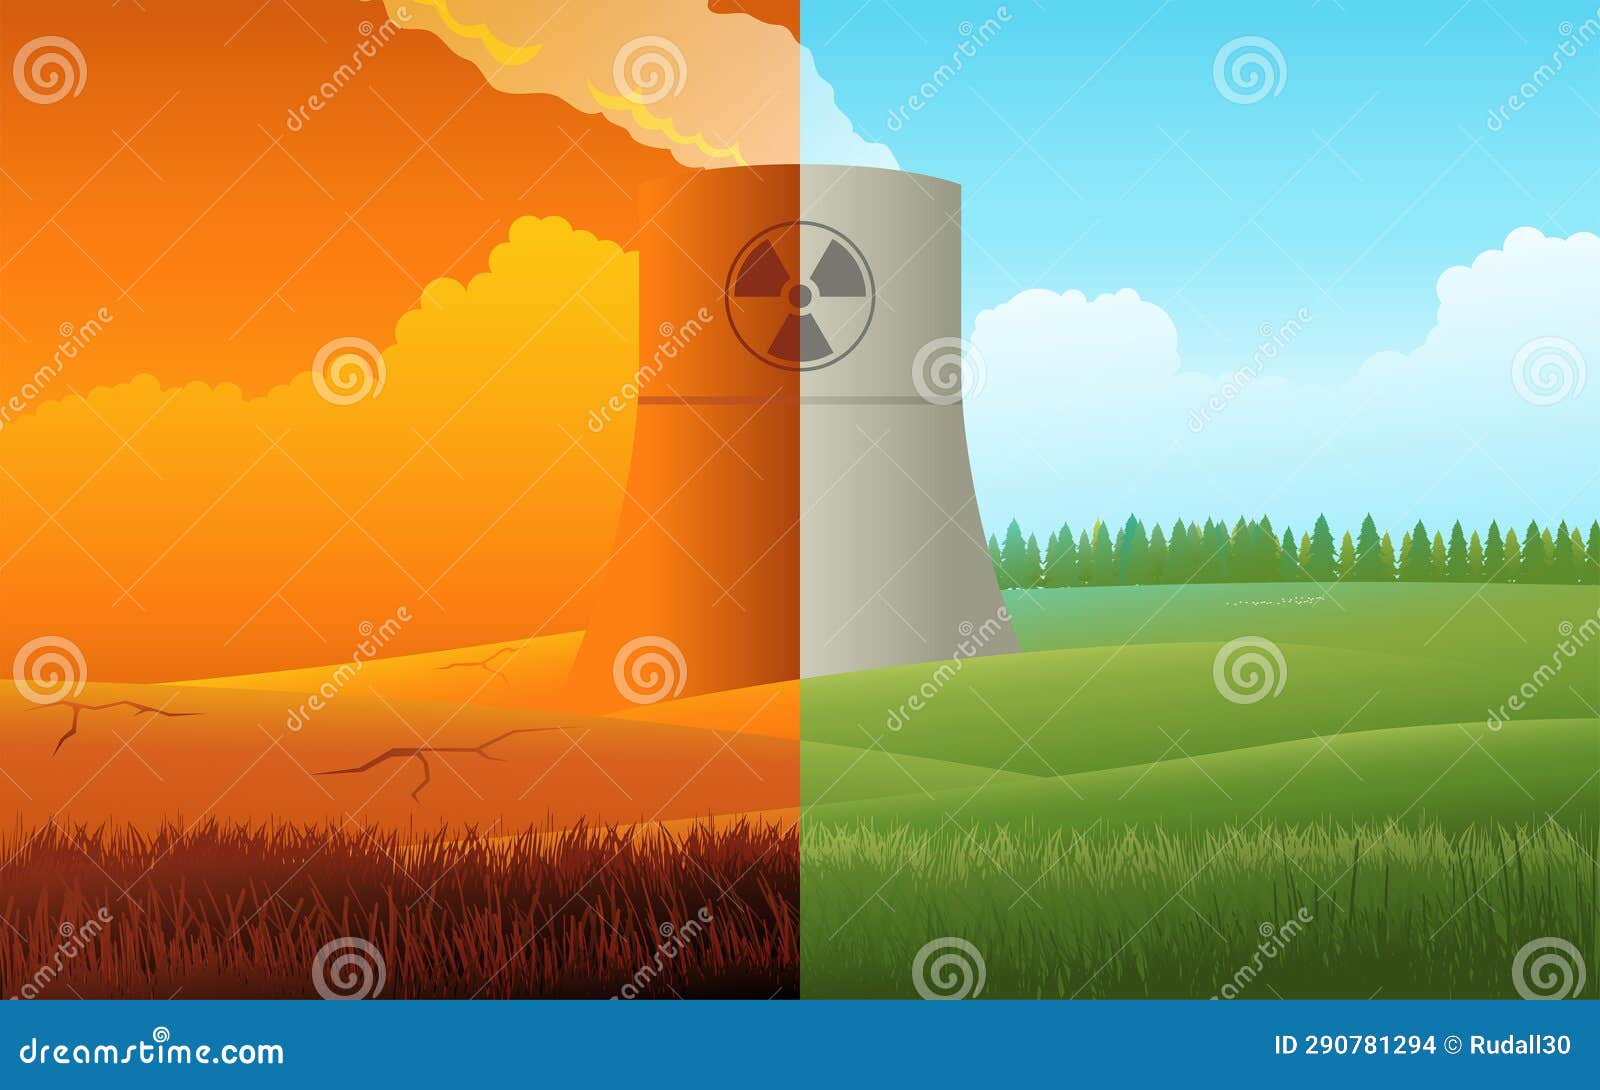 environmental duality of nuclear power plant